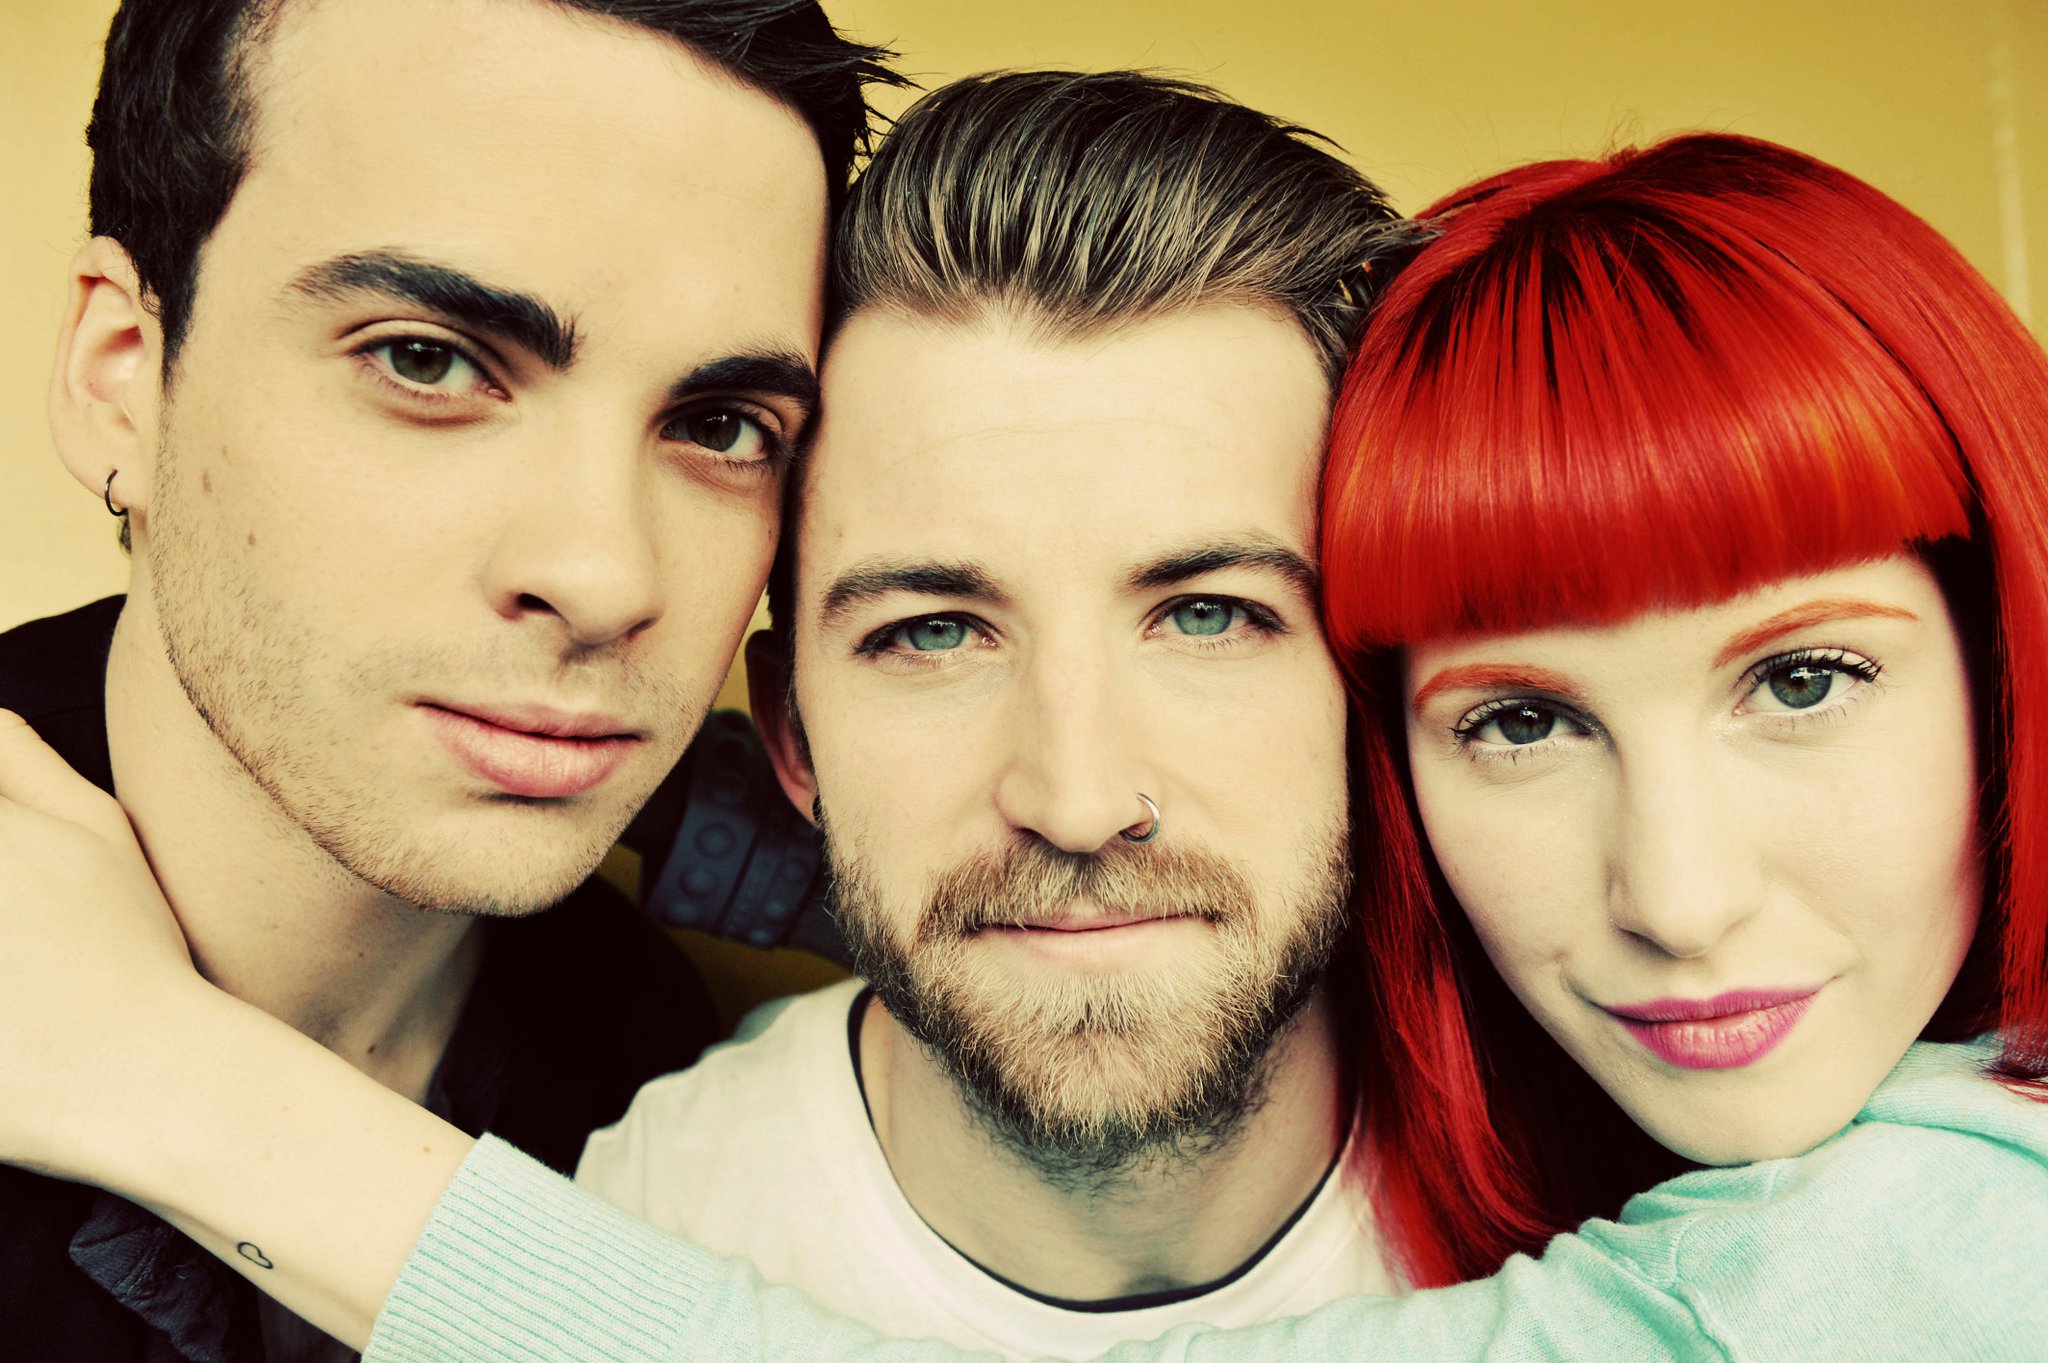 Paramore's self-titled album on sale at Google Play - Listen Here